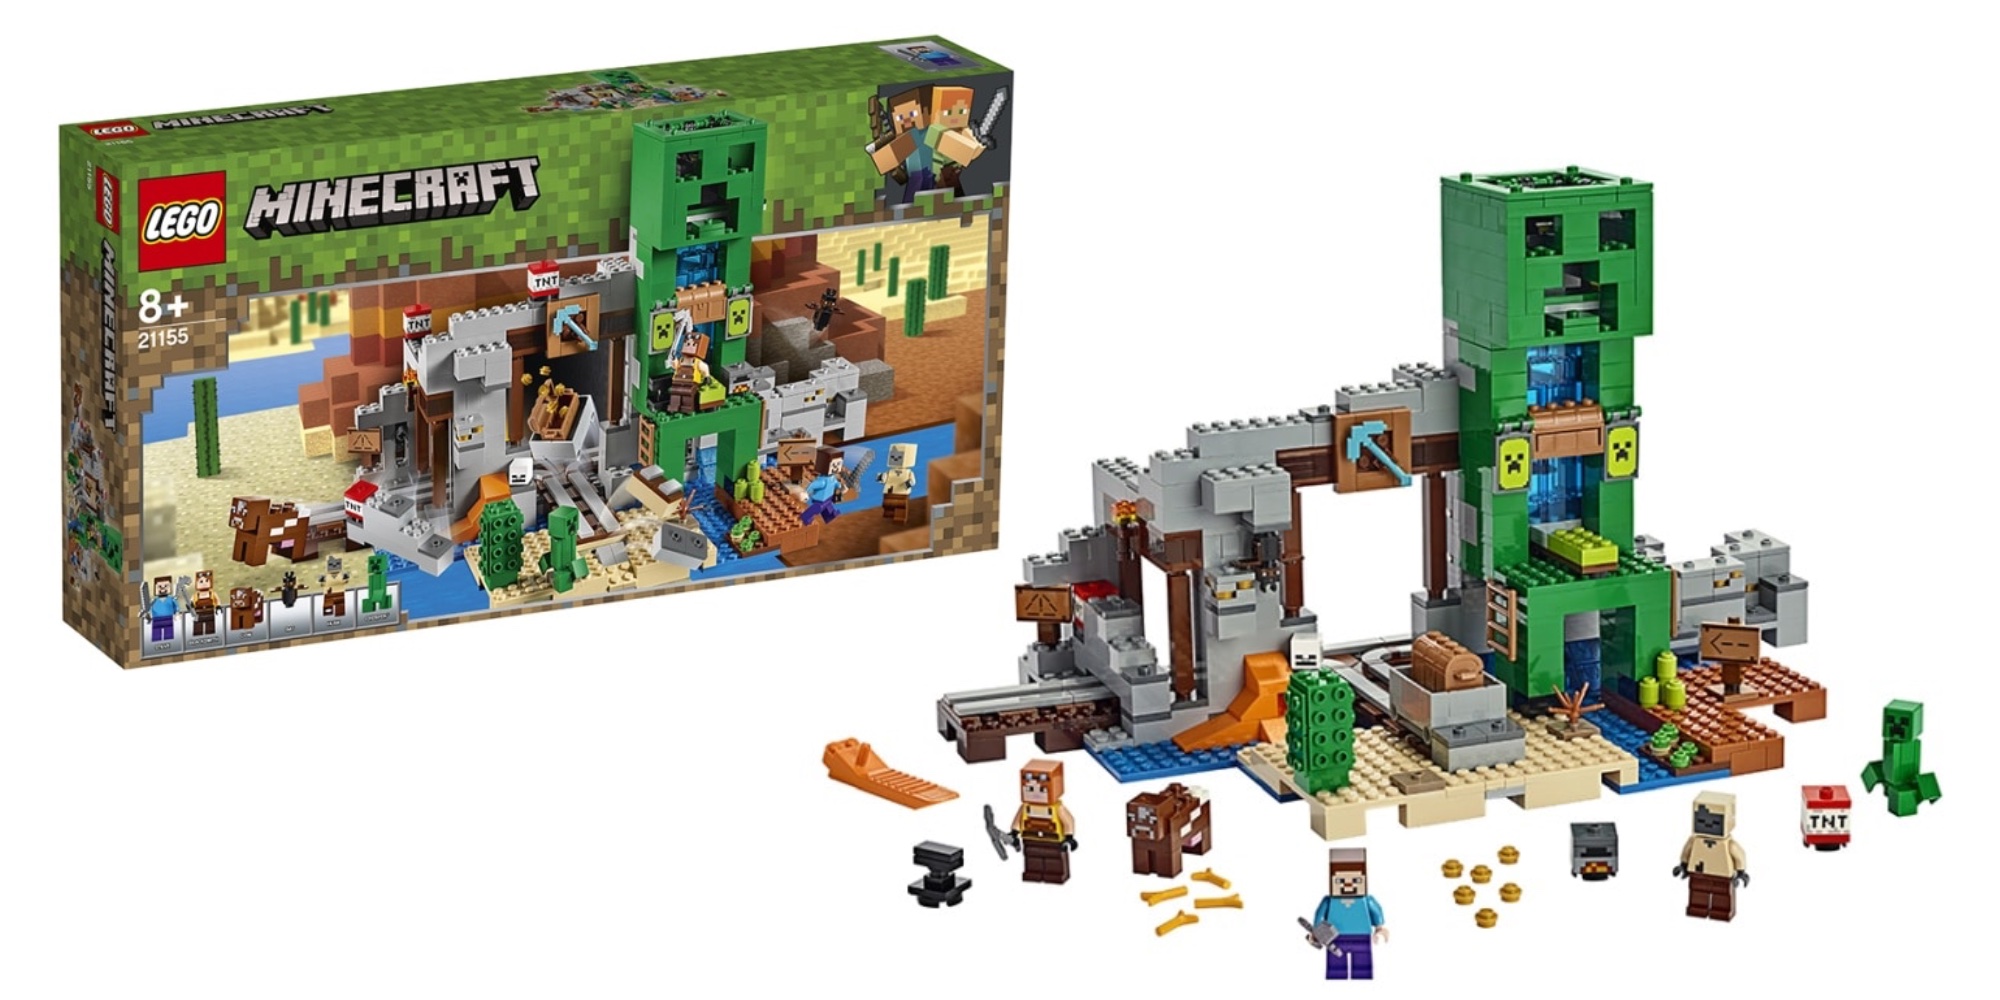 LEGO Minecraft summer sets bring three new creations 9to5Toys